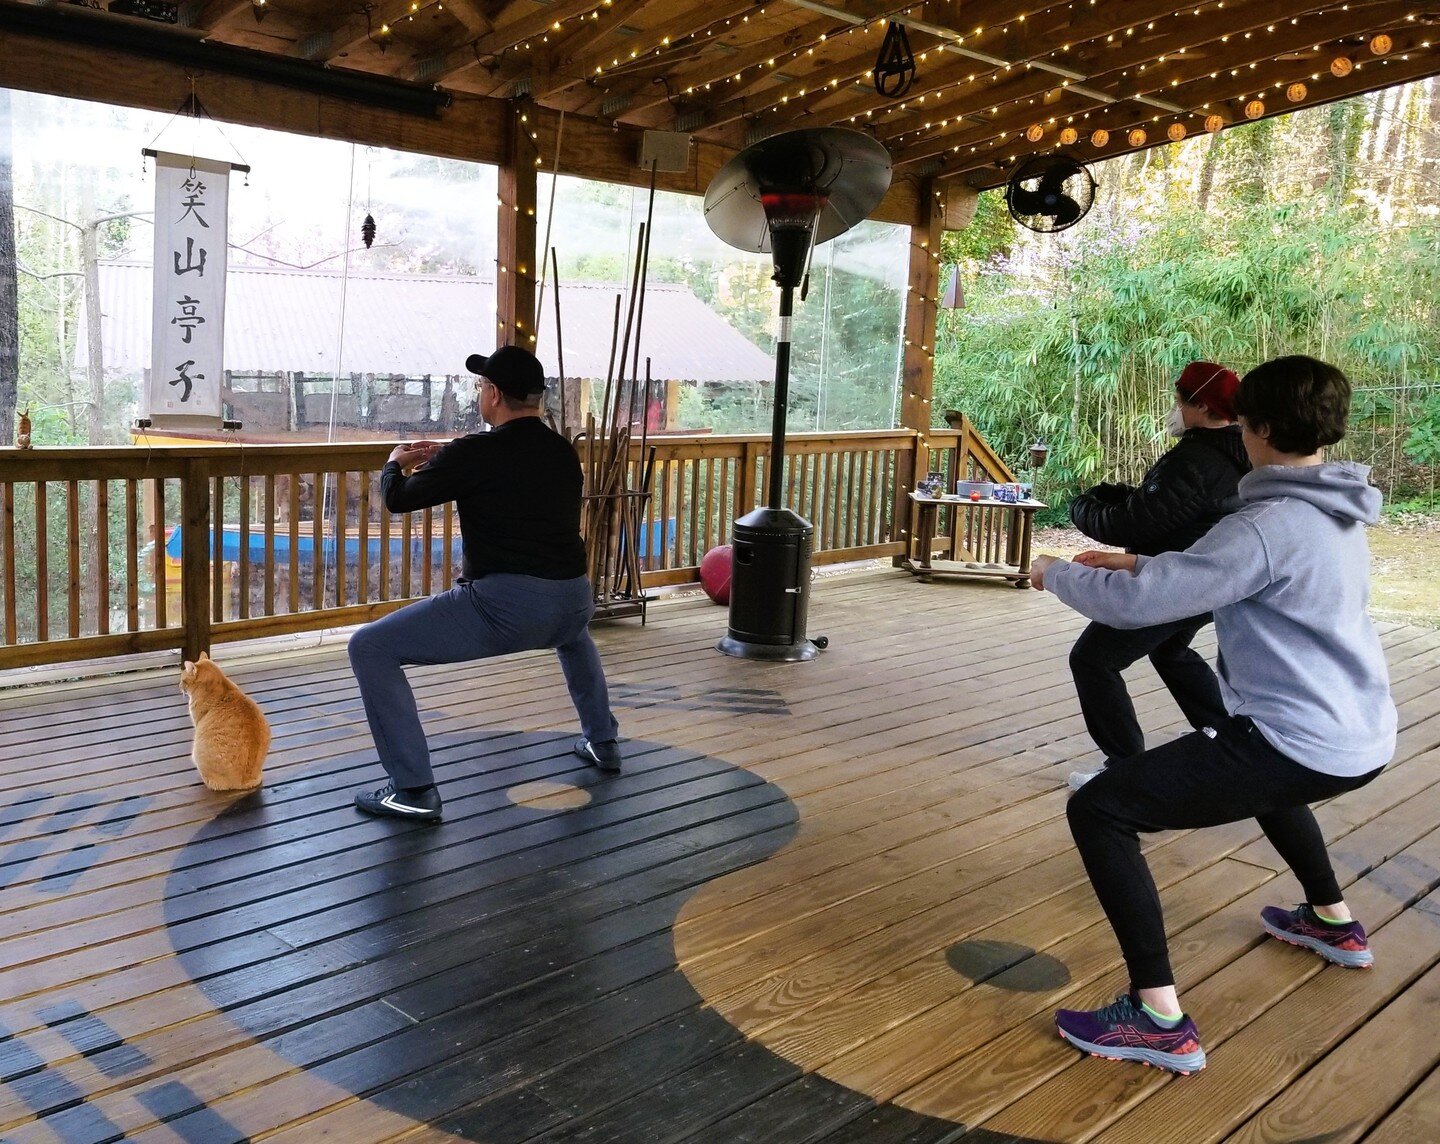 Taiji Kitty helping Steve lead stance drill! Both have a very stable position.

The pavilion feels so happy with spring settling in! Bees buzzing the blueberry bushes and azaleas starting to bloom!

#nctaiji, #taiji, #taijiquan, #durhamtaiji, #blackb